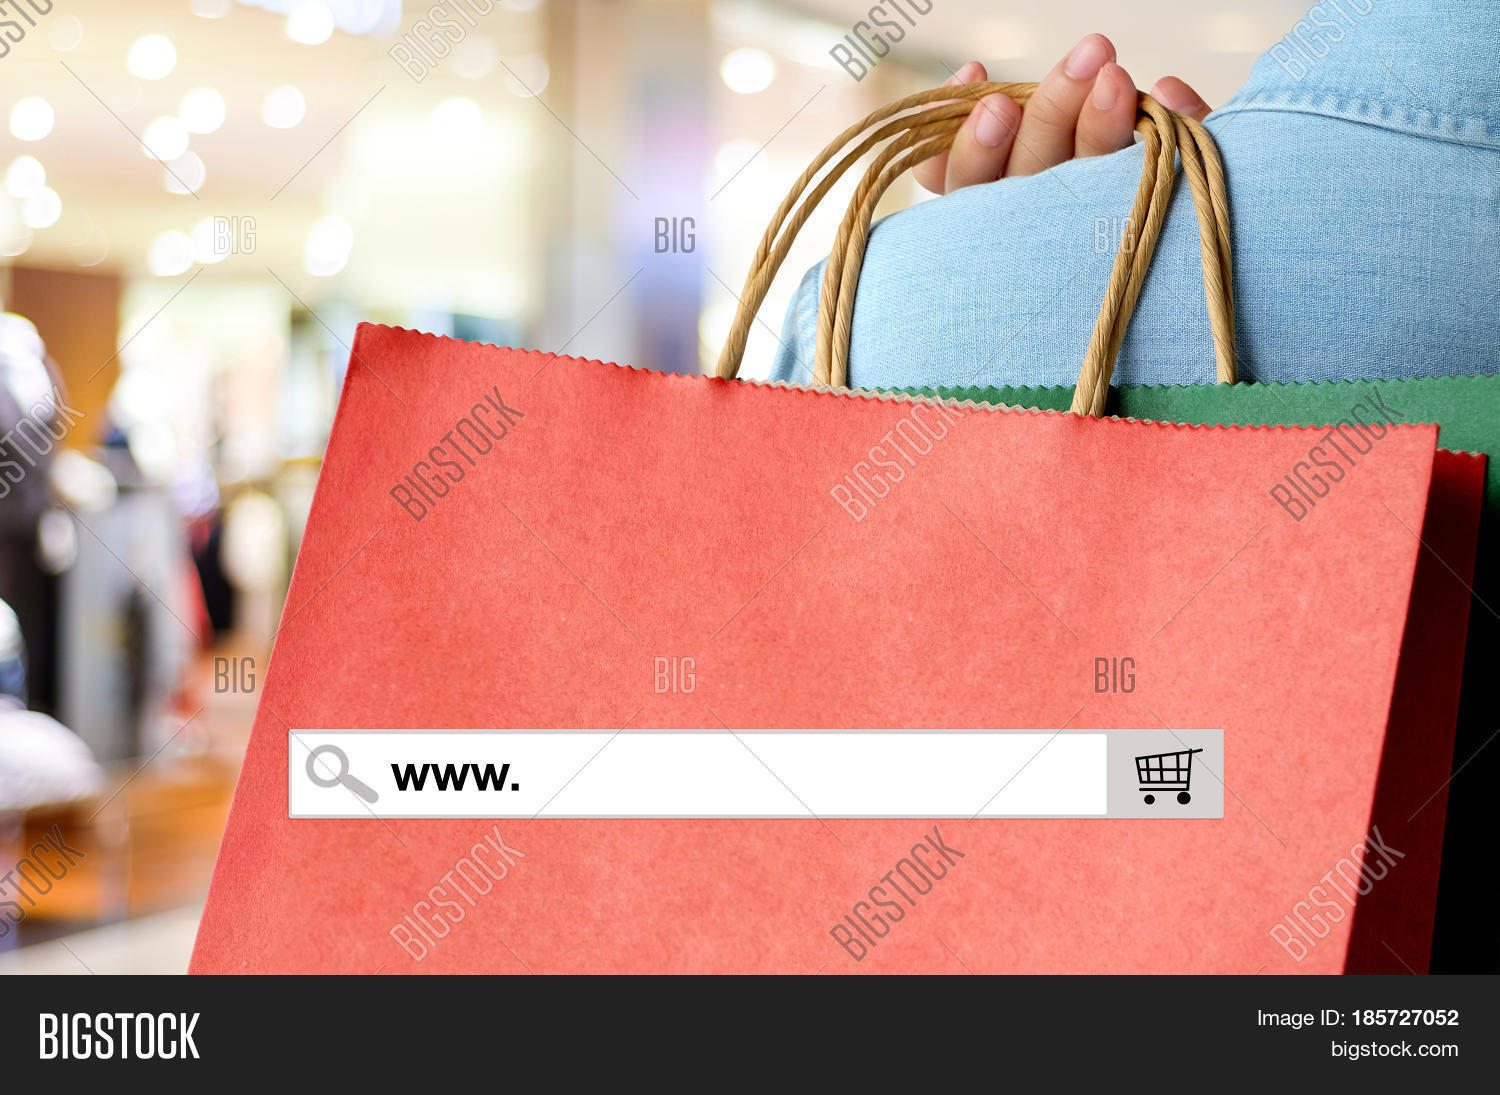 Word On Search Bar Image Photo Trial Bigstock